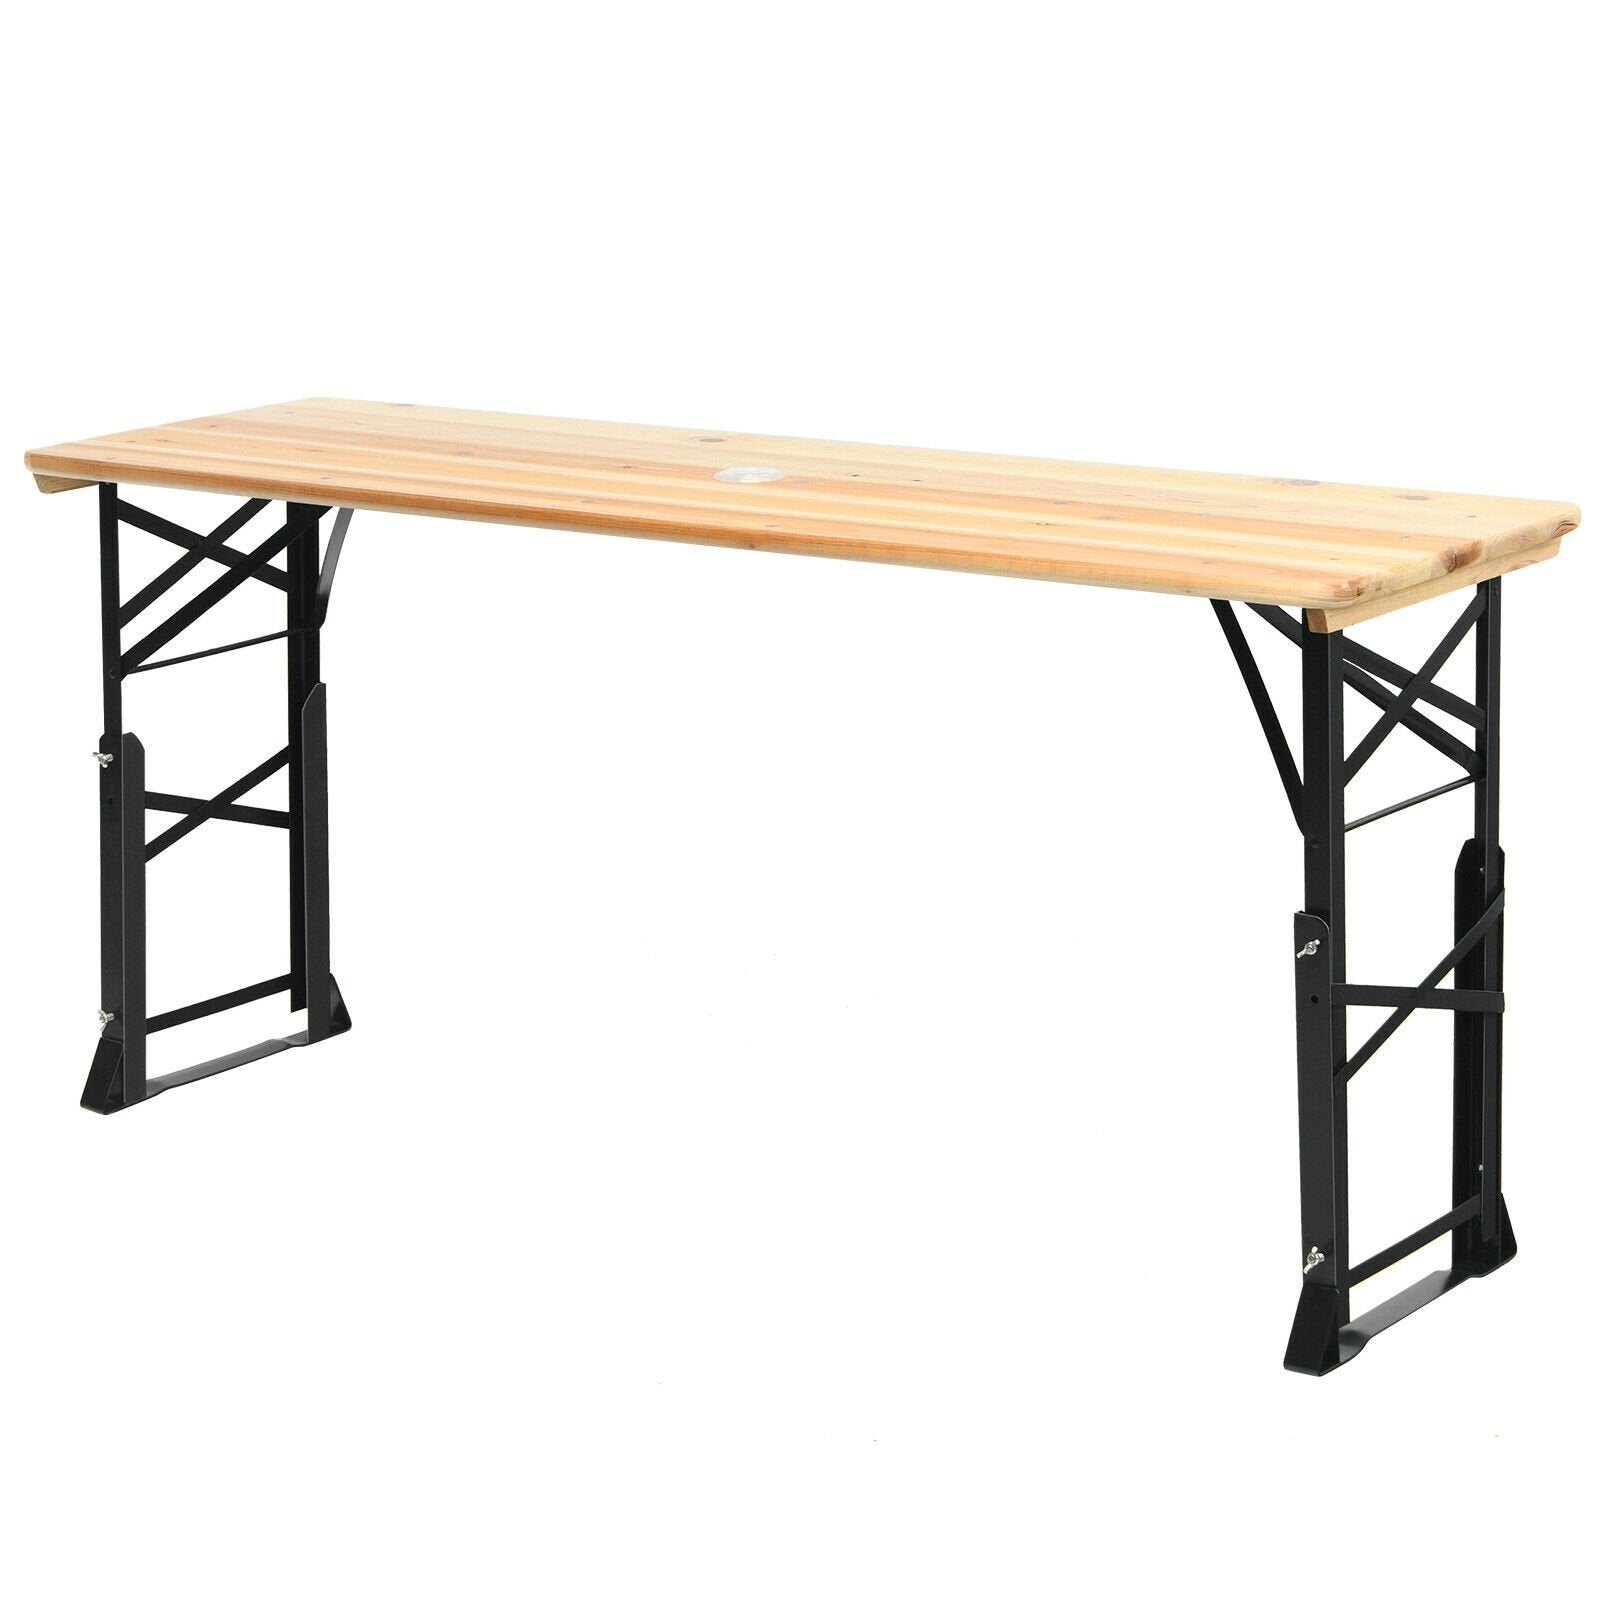 66.5 Inch Outdoor Wood Folding Picnic Table with Adjustable Heights - Gallery Canada